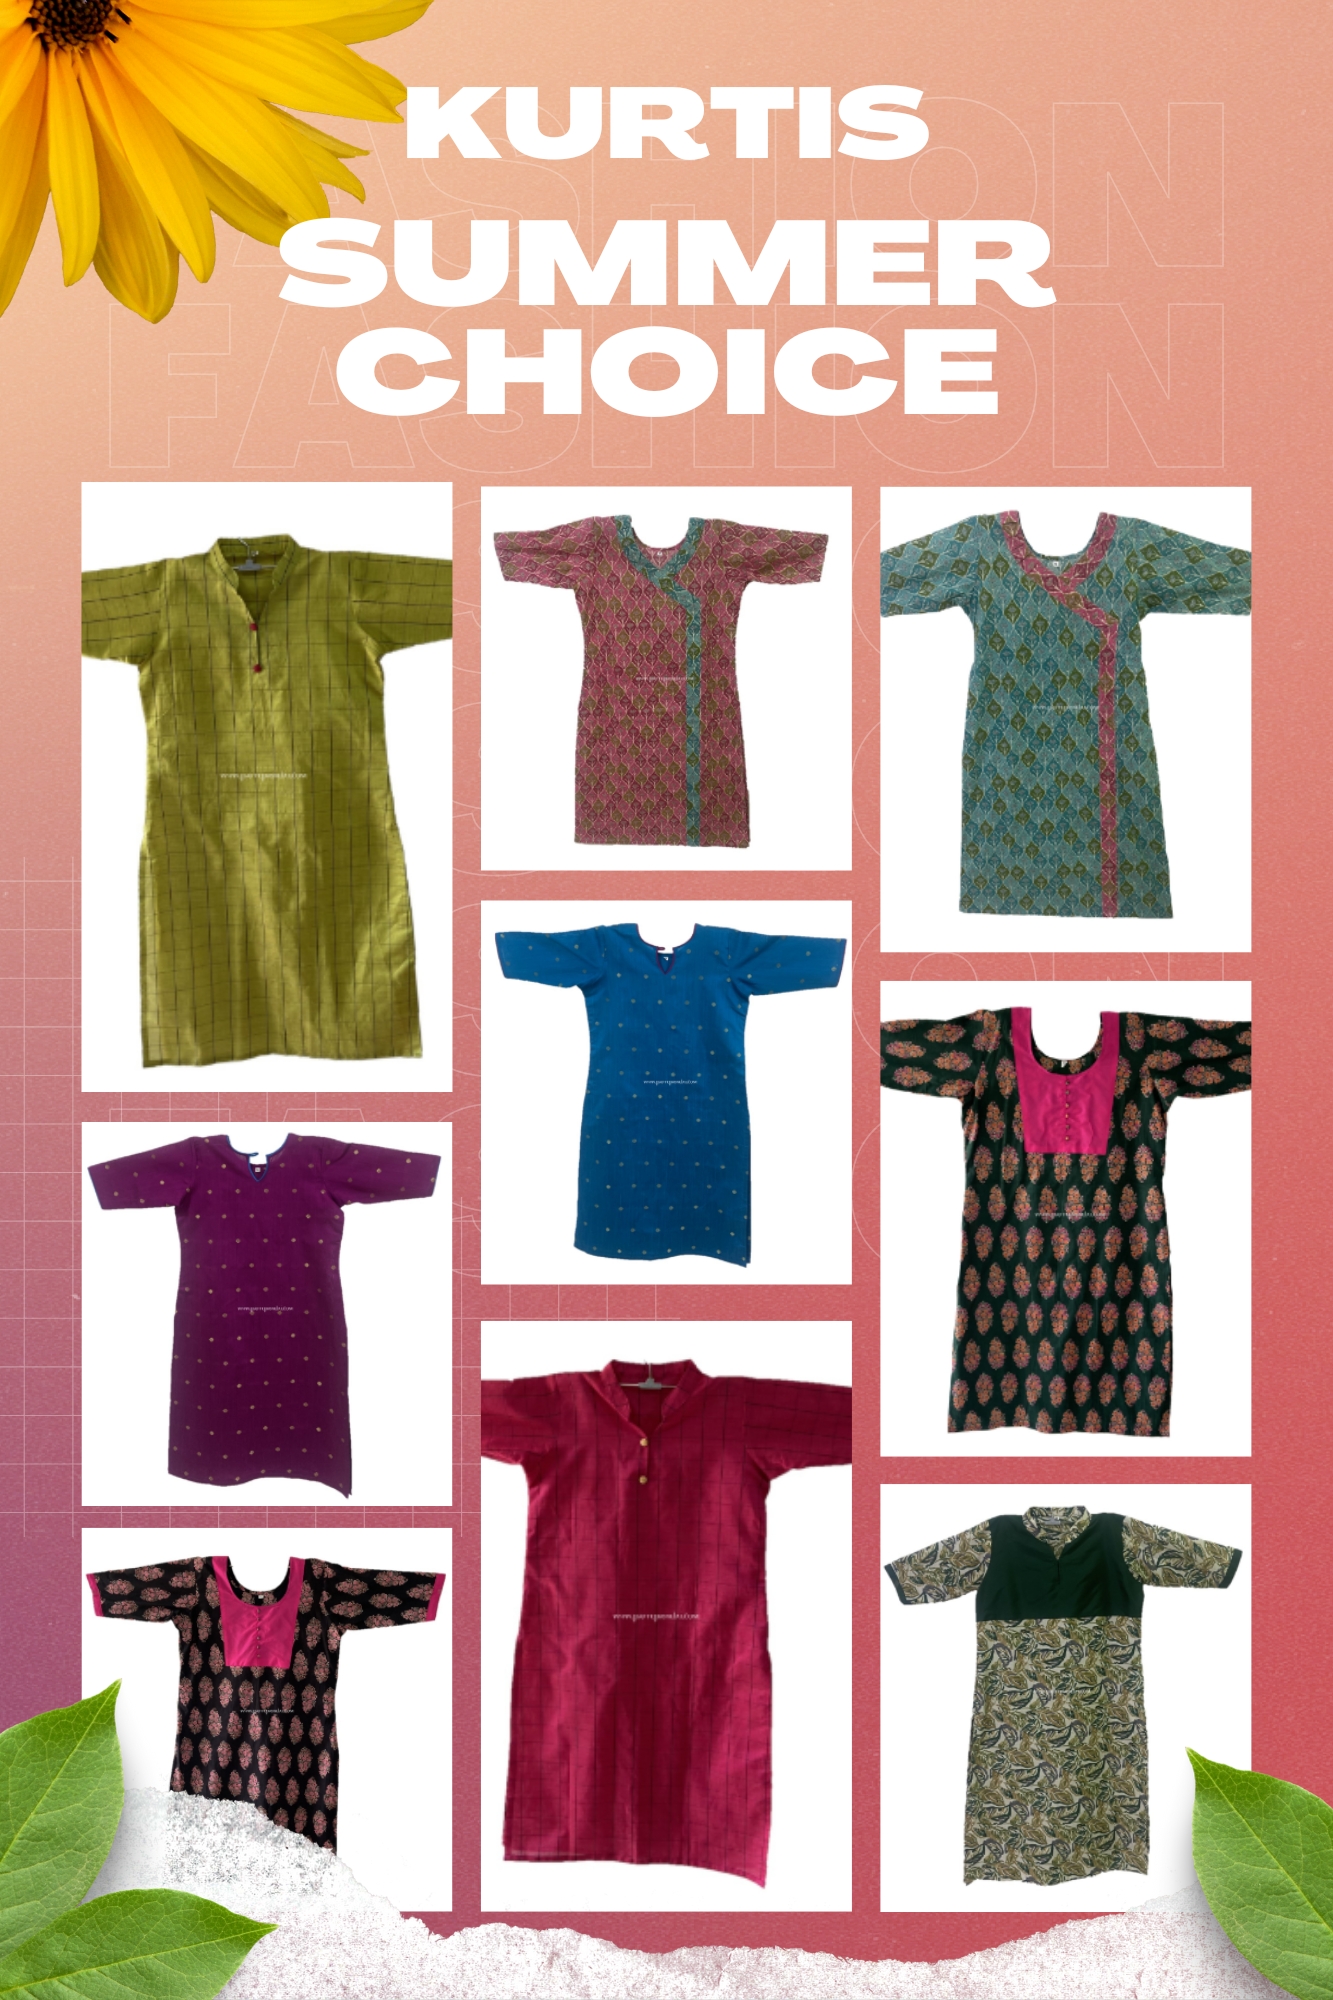 Stay Cool and Chic: Summer Choice Kurtis You'll Love